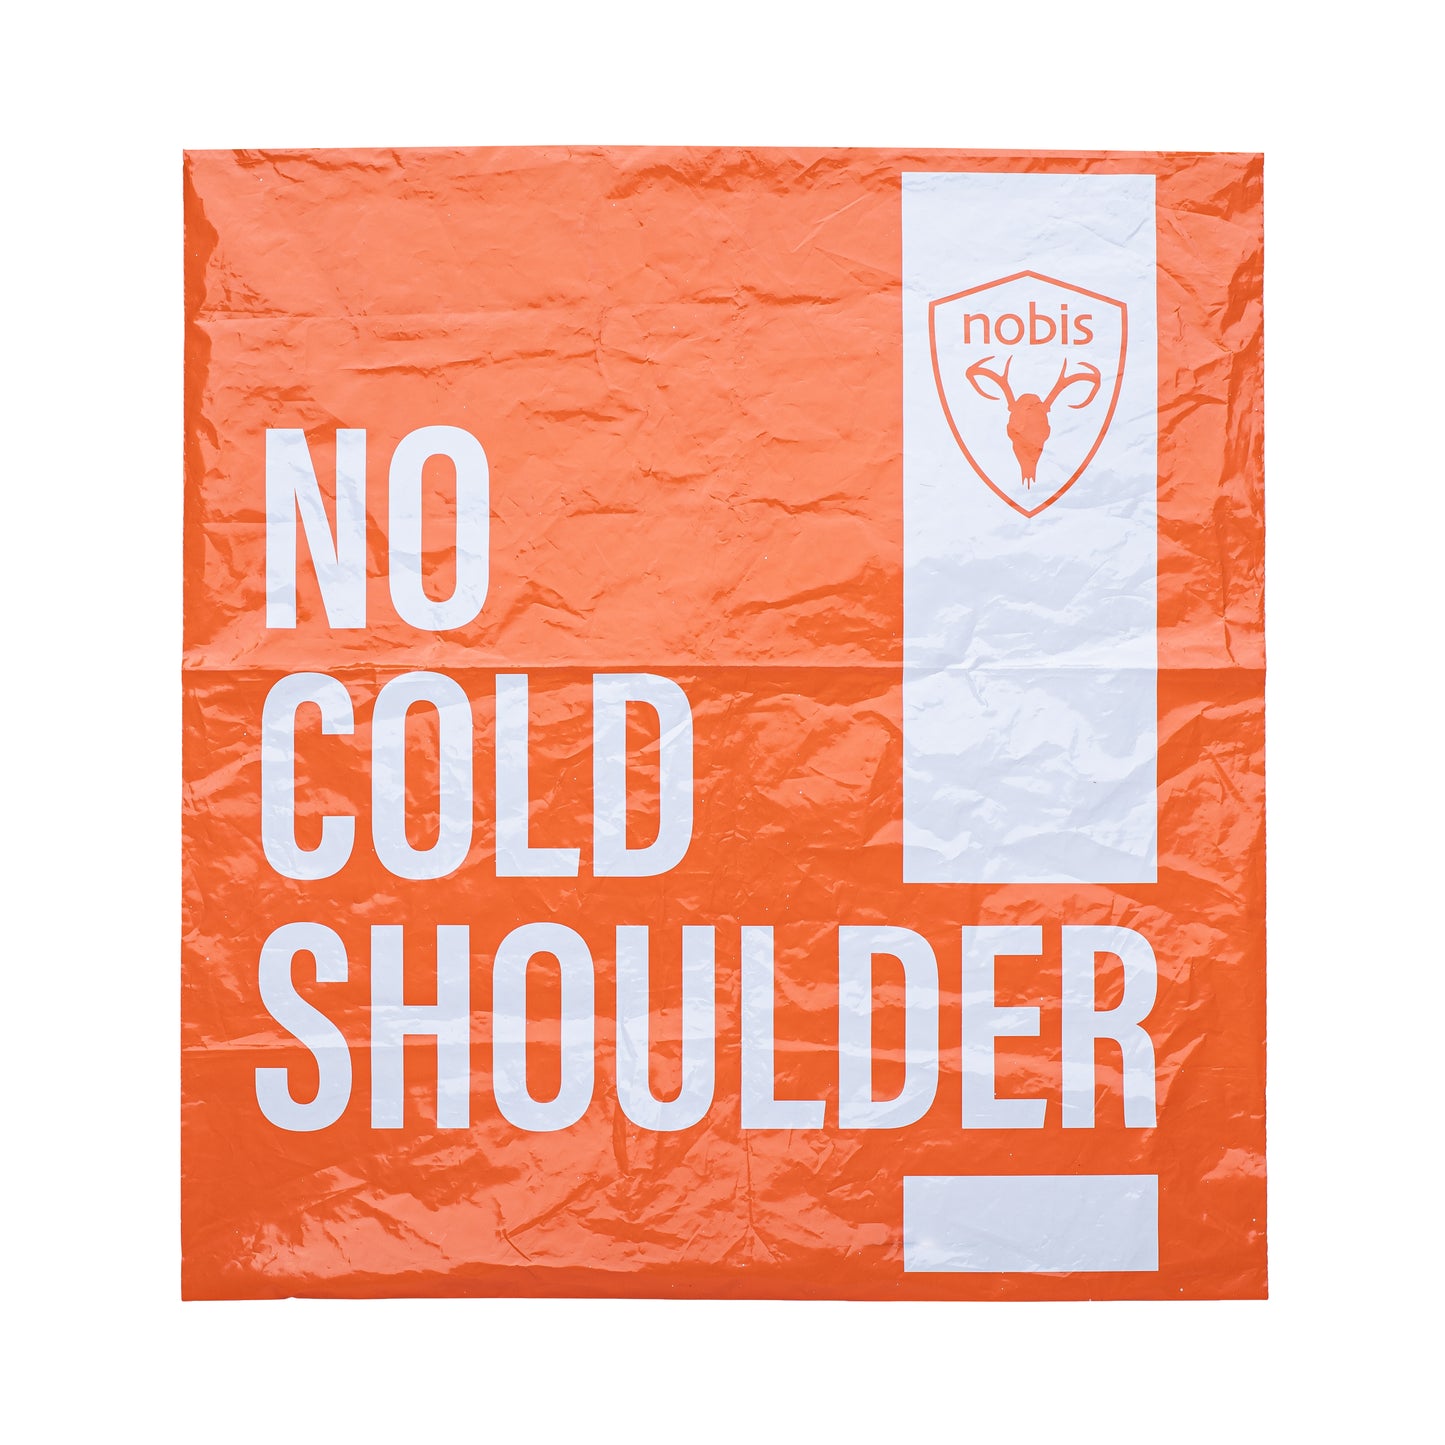 No Cold Shoulder sealable mailer bag that comes complimentary with any jacket purchase during the month of November